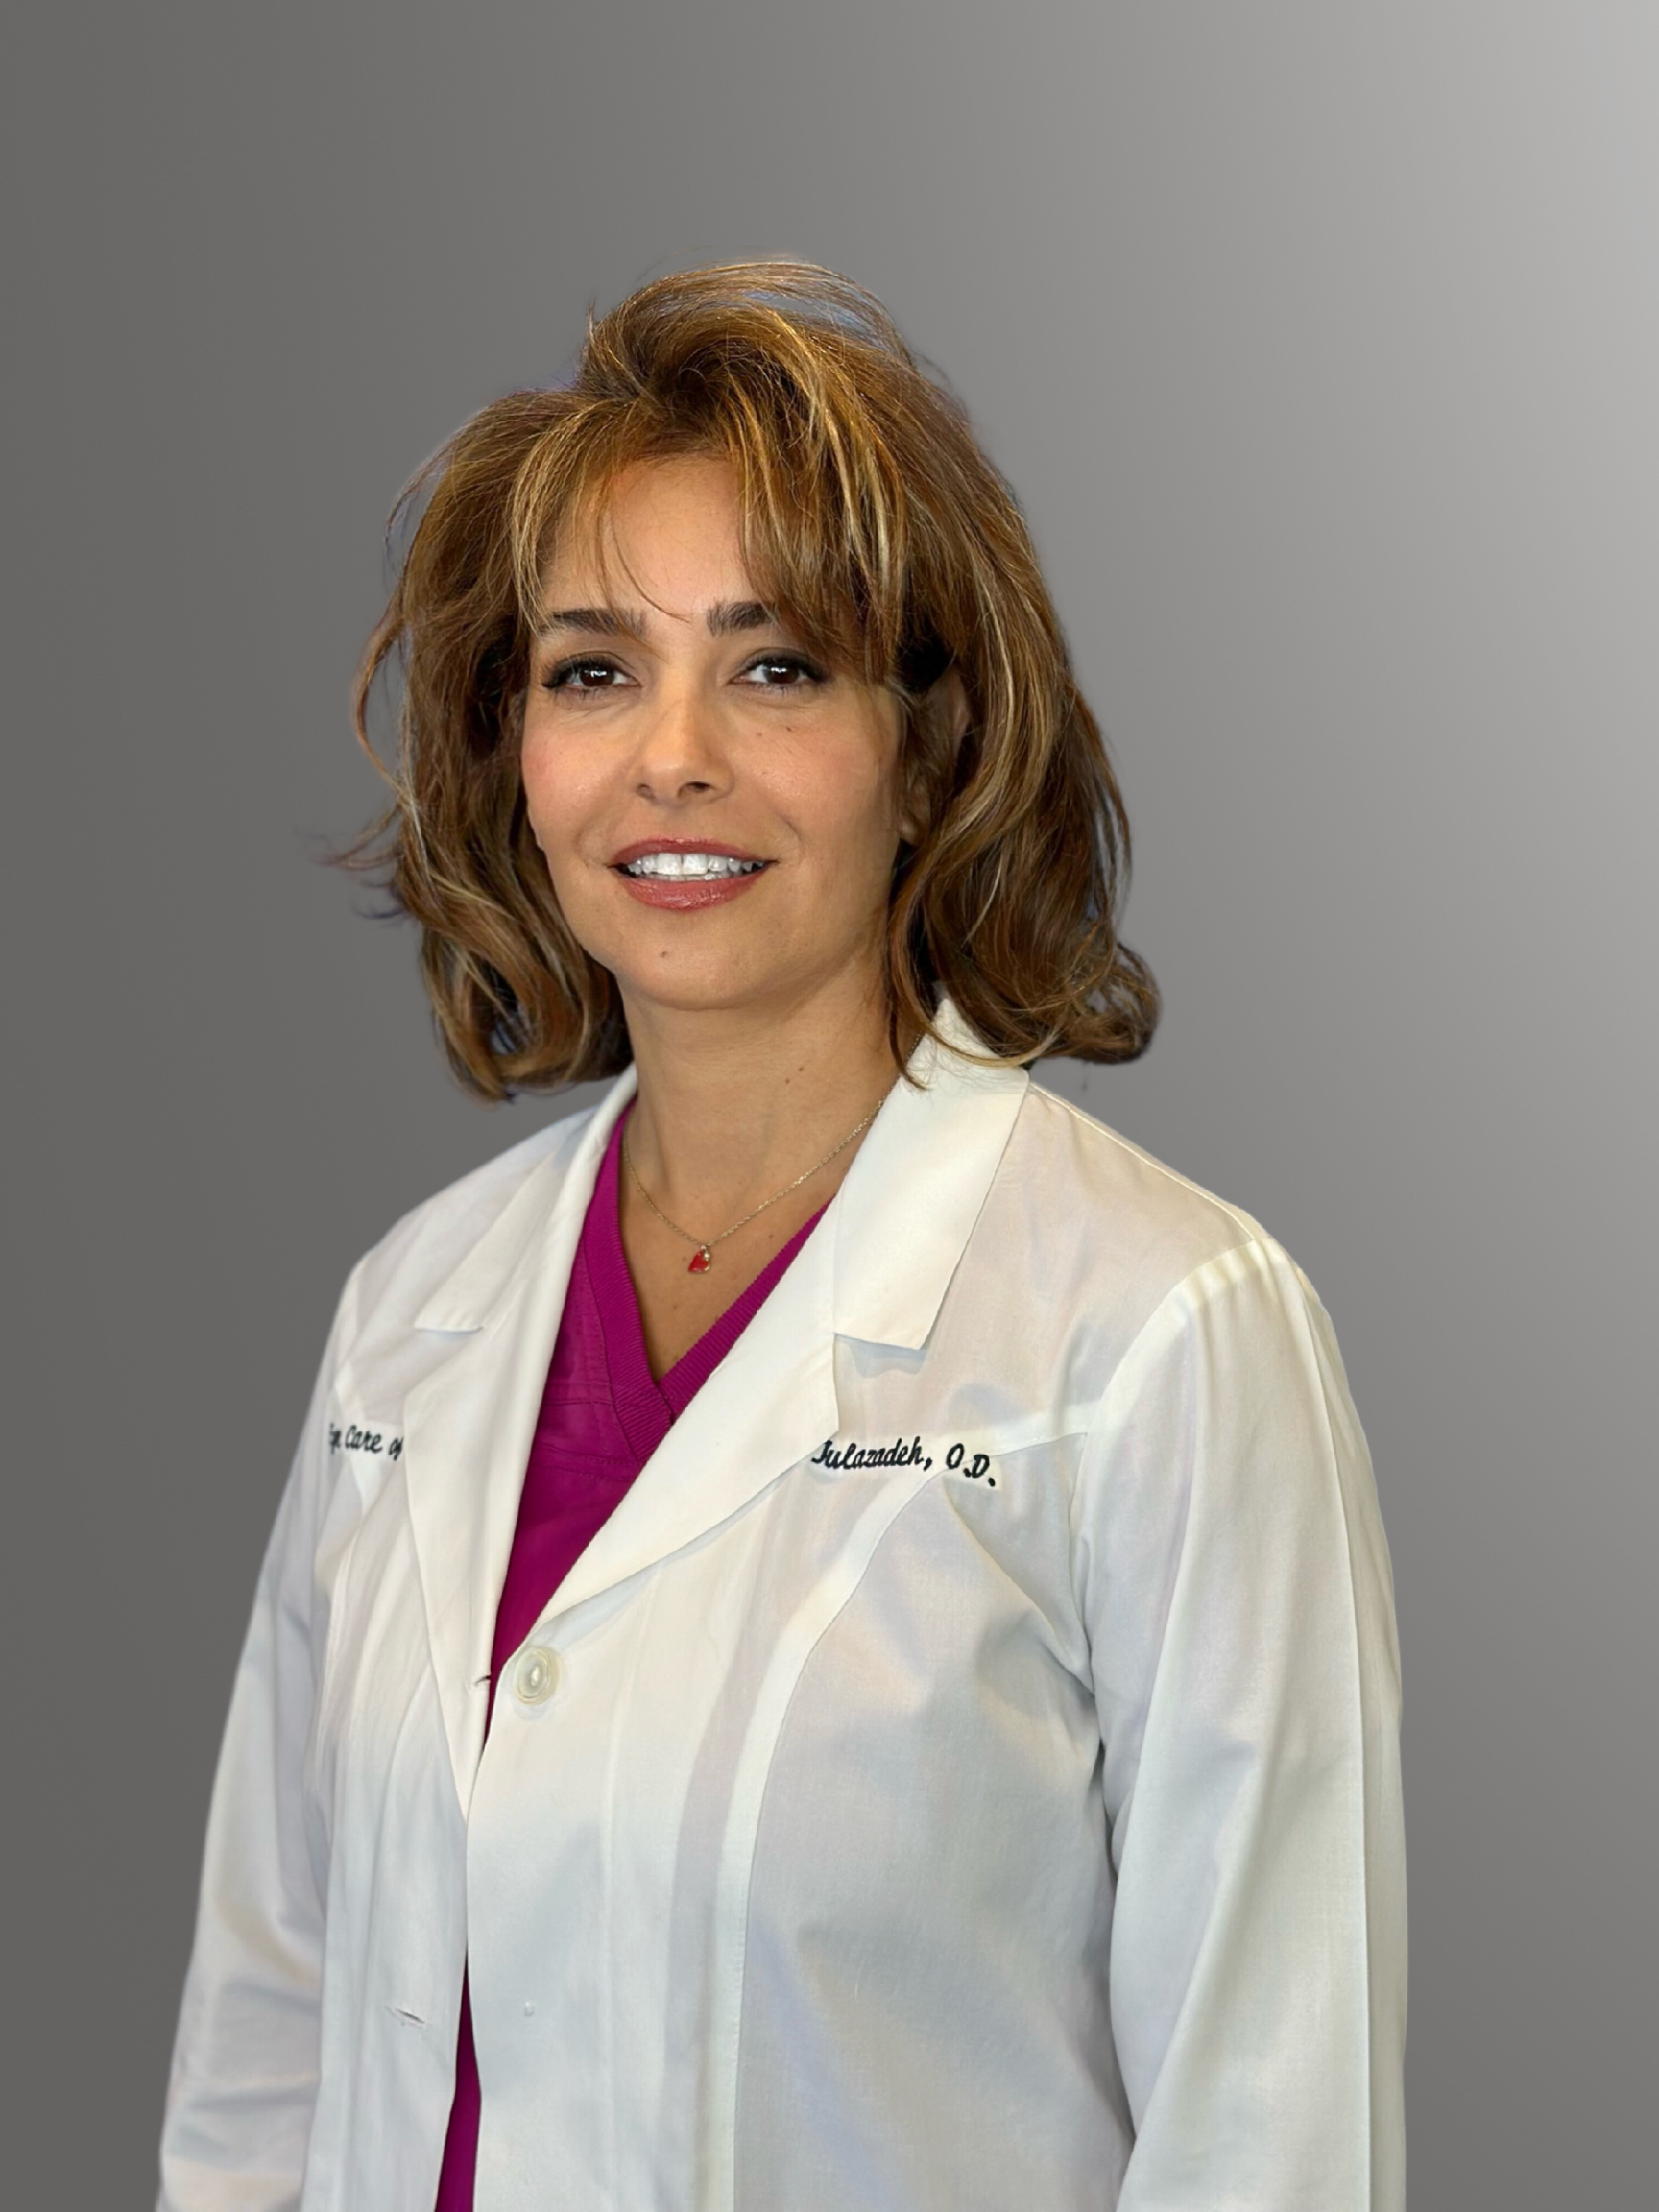 Dr. Julazadeh is a dedicated and accomplished optometrist, committed to providing exceptional eye care. Dr. Julazadeh emphasizes preventive care and educates her patients about maintaining good eye health.